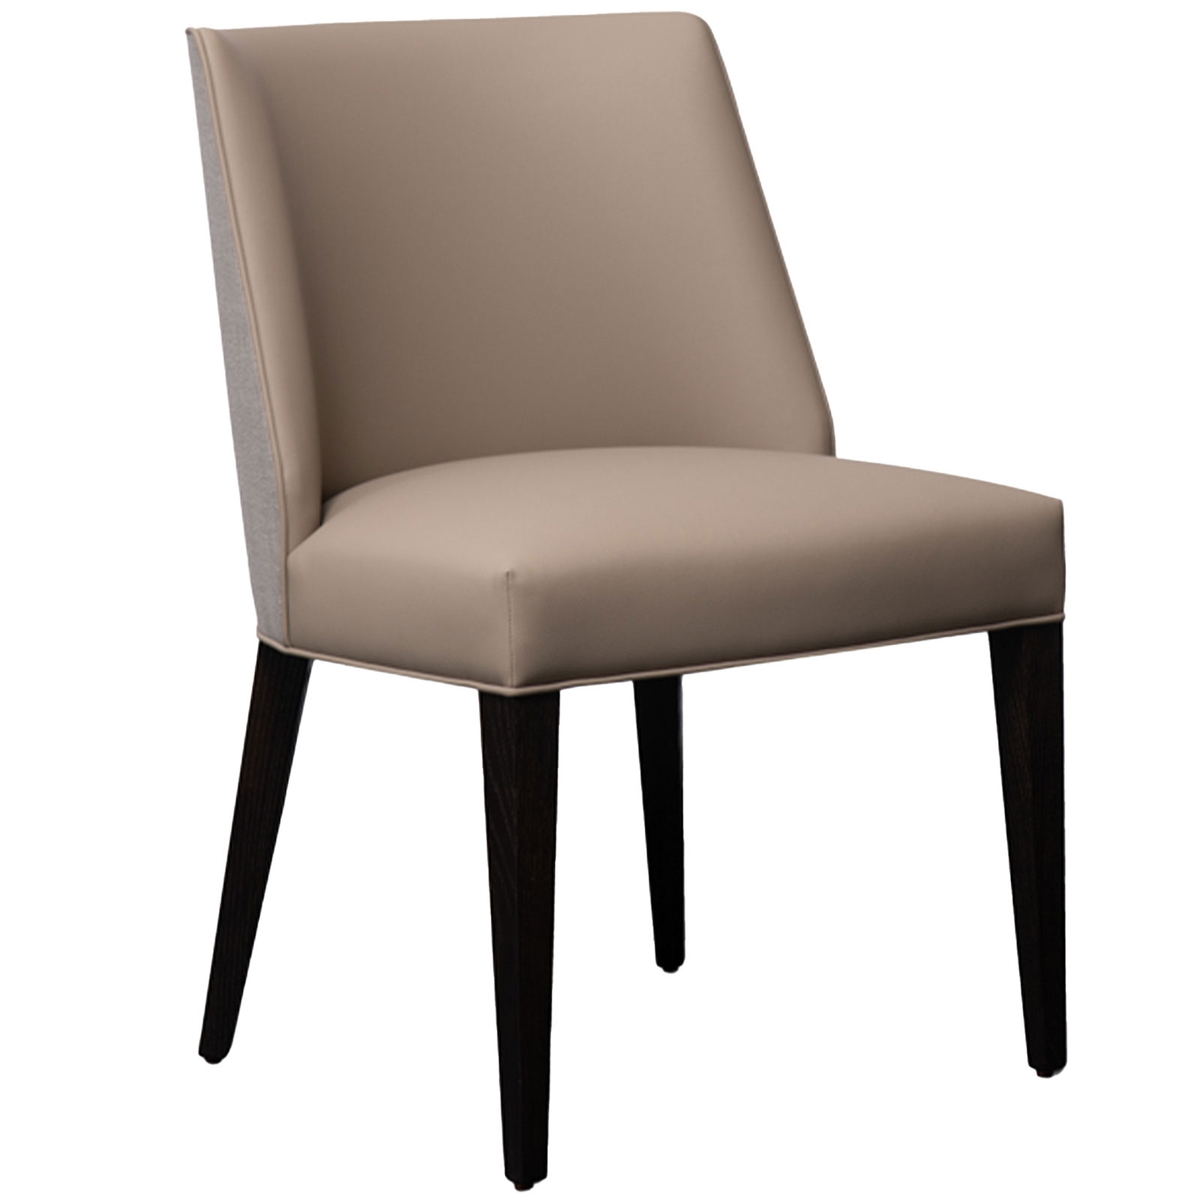 Ansley Set of 4 Dining Chairs, Taupe